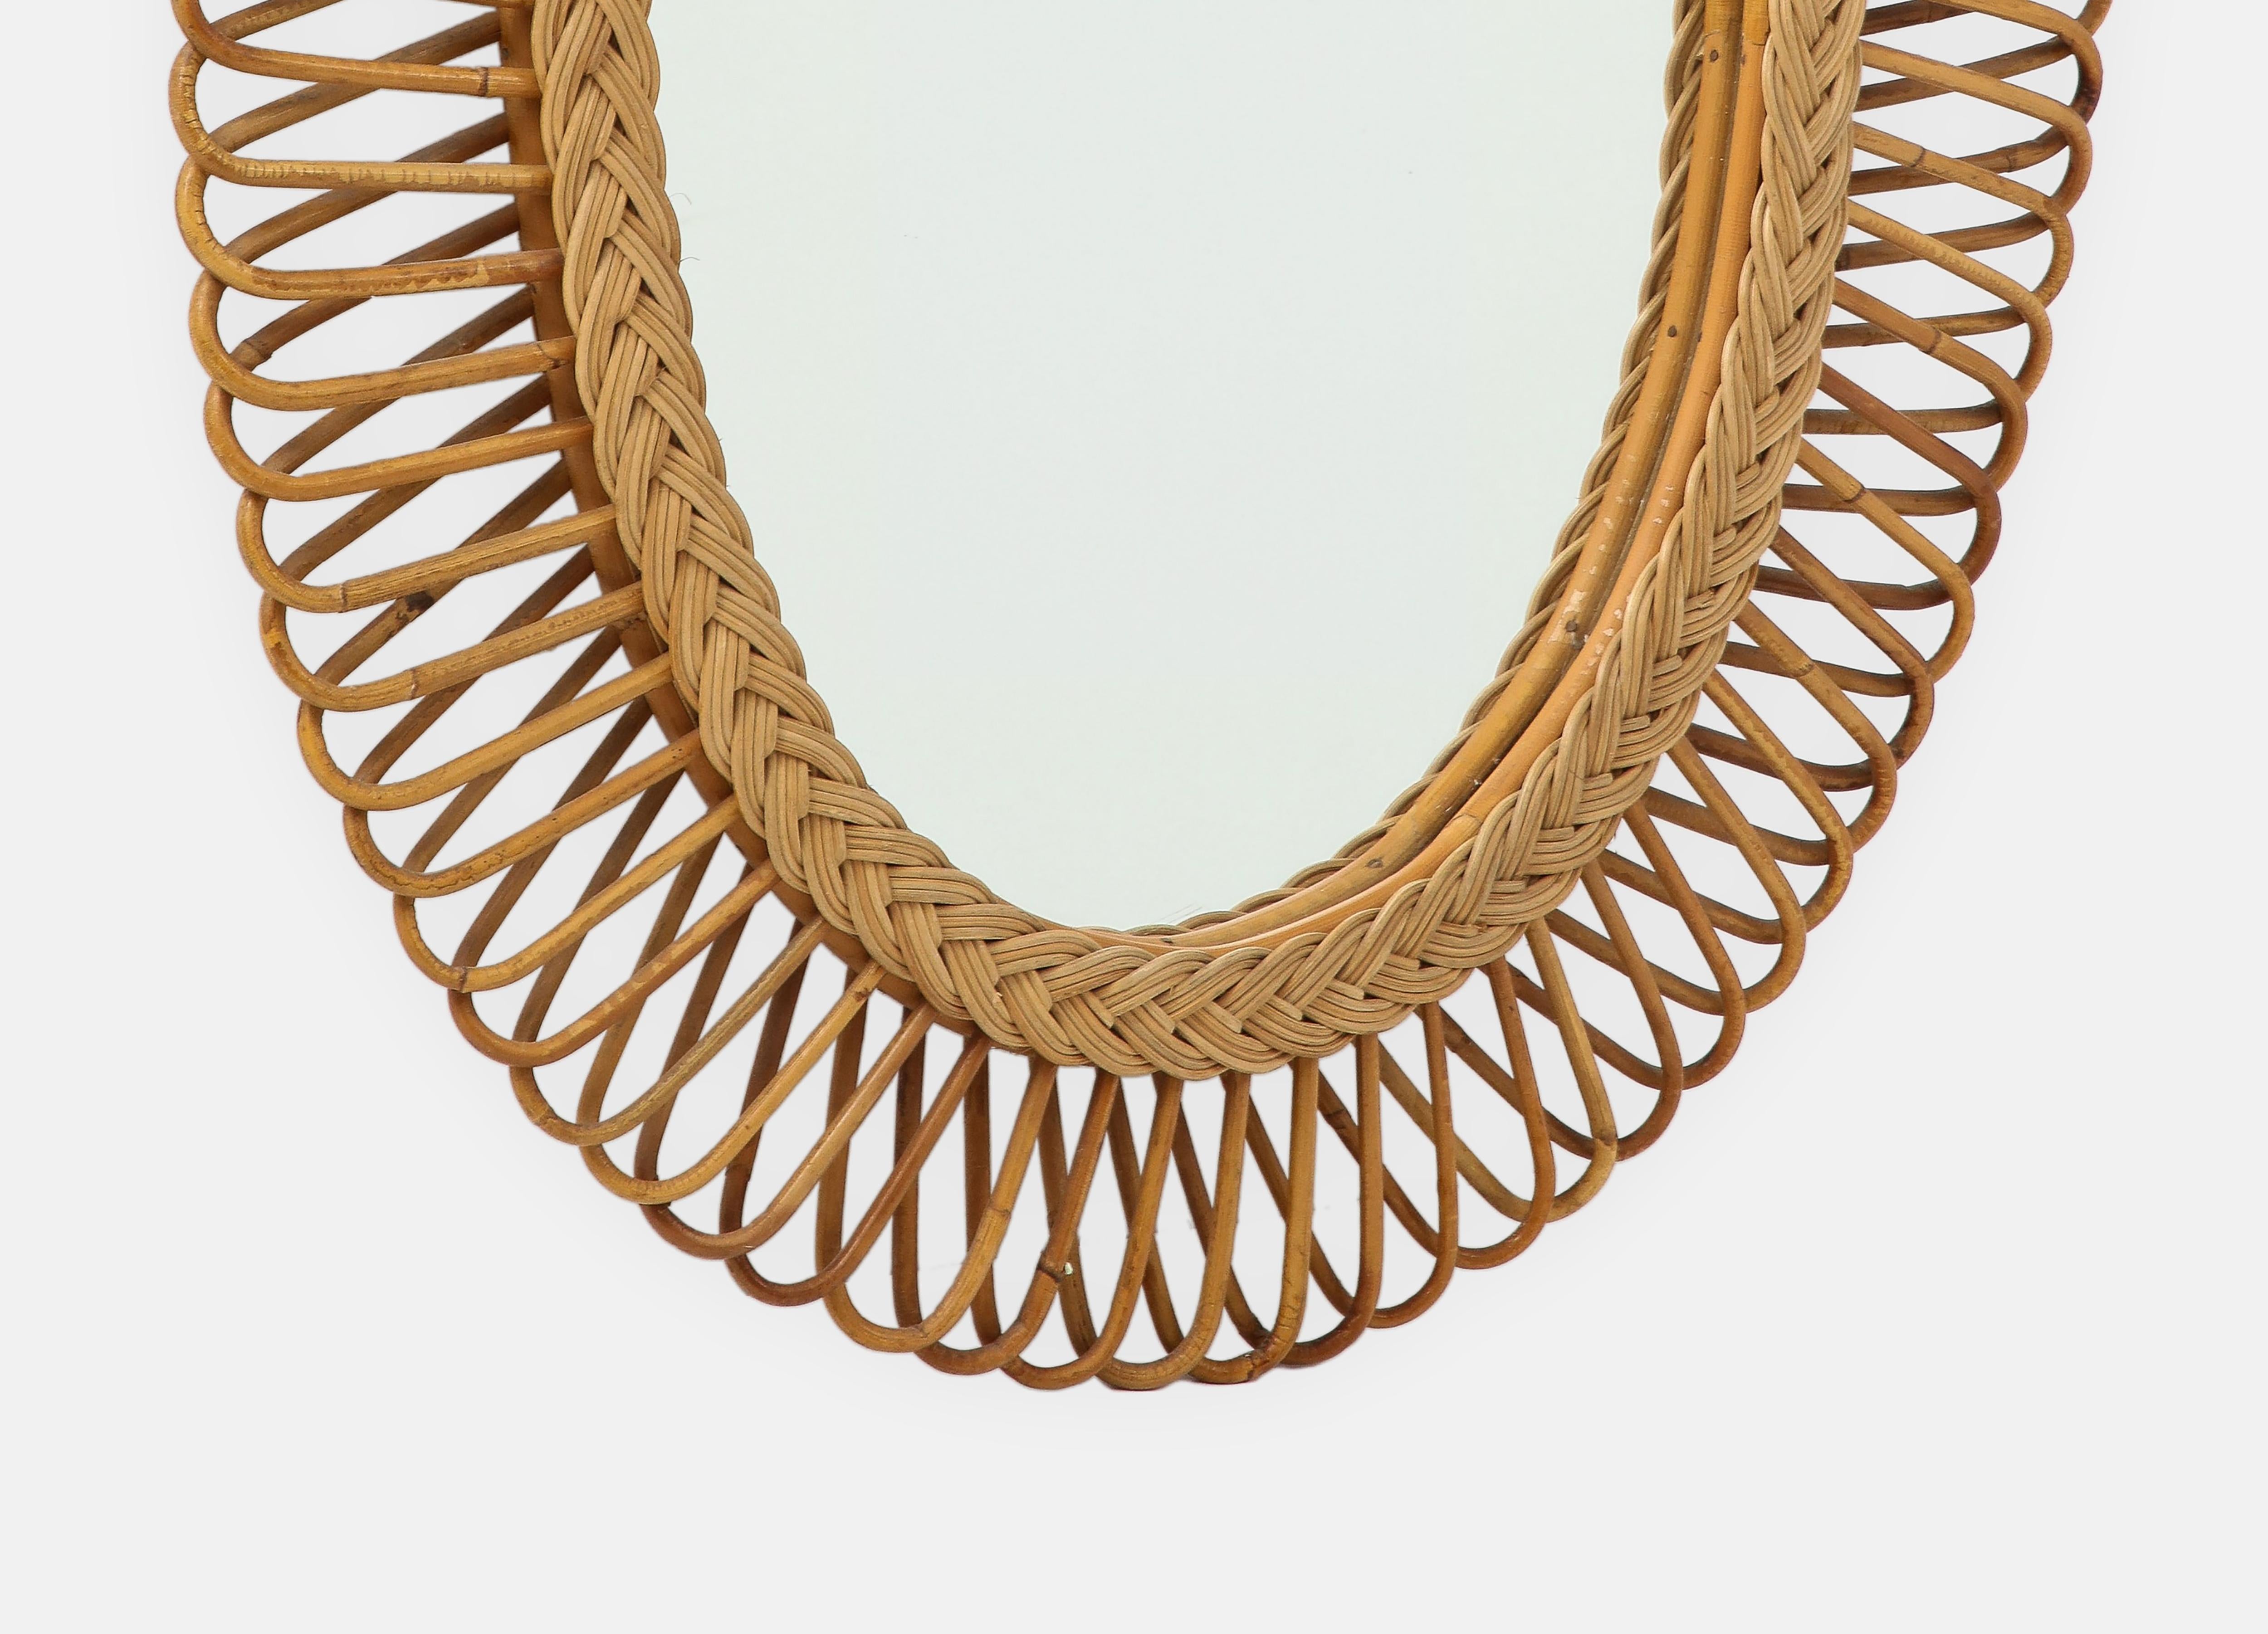 Bonacina Oval Bamboo and Rattan Mirror, Italy, 1950s For Sale 1